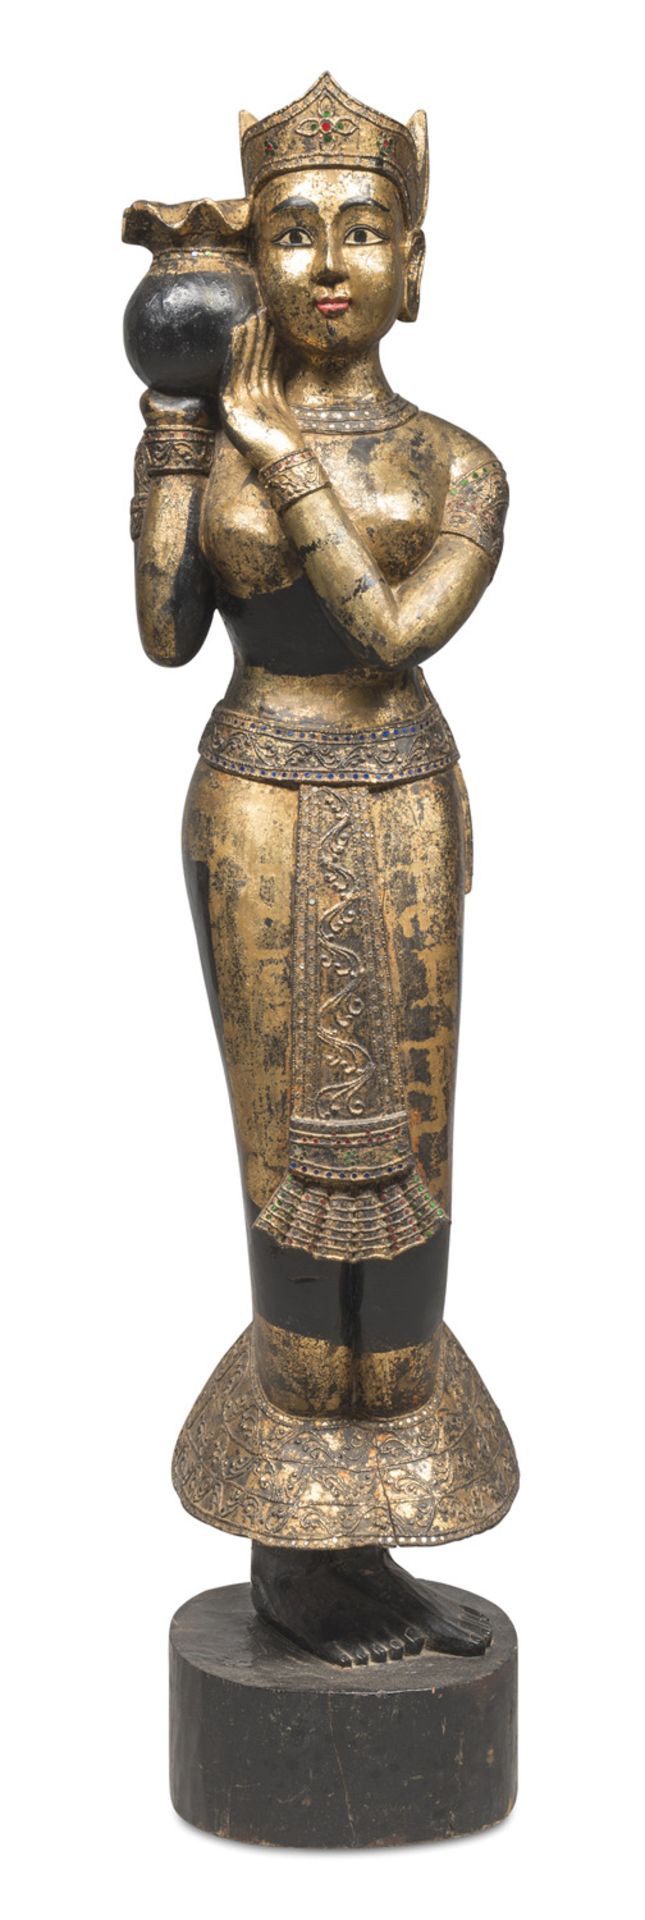 BIG STATUE OF DIVINITY IN LACQUERED AND GILDED WOOD THAILAND OR BURMA 20th CENTURY